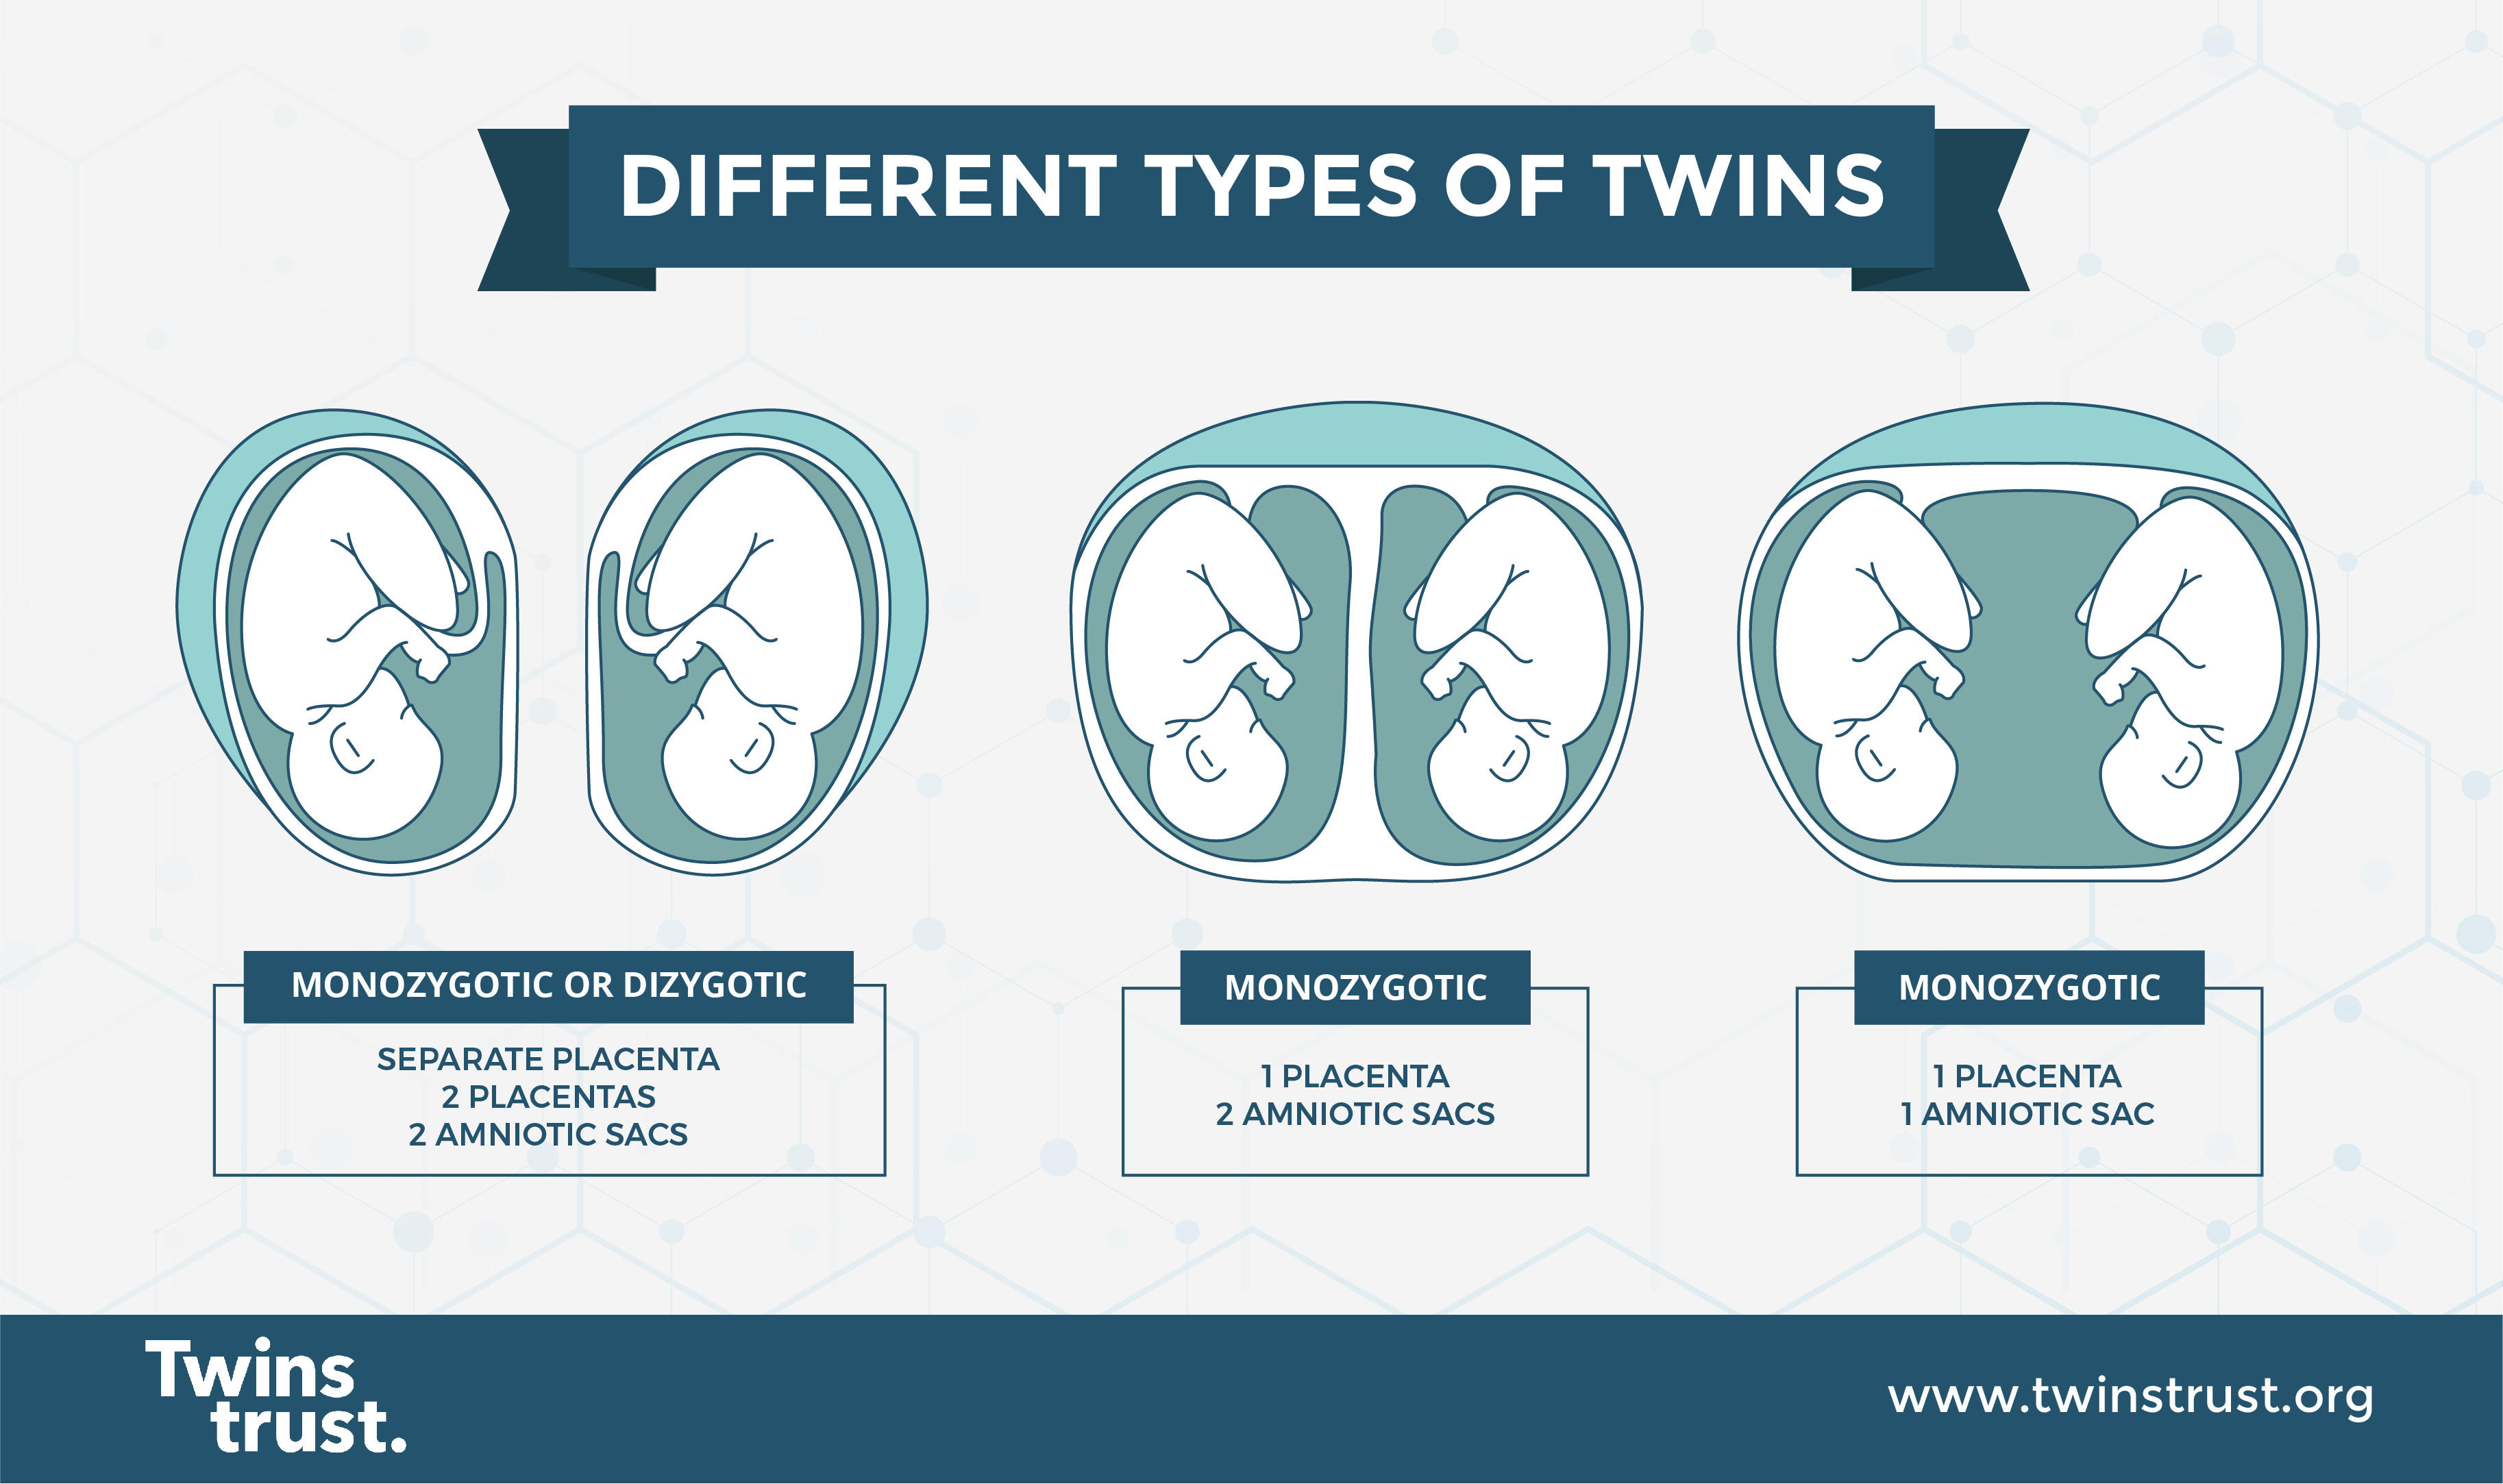 Monozygotic or dizygotic twins can have two placentas and two amniotic sacs. Monozygotic twins can have one placenta and two amniotic sacs. Monozygotic twins can have one placenta and one amniotic sac